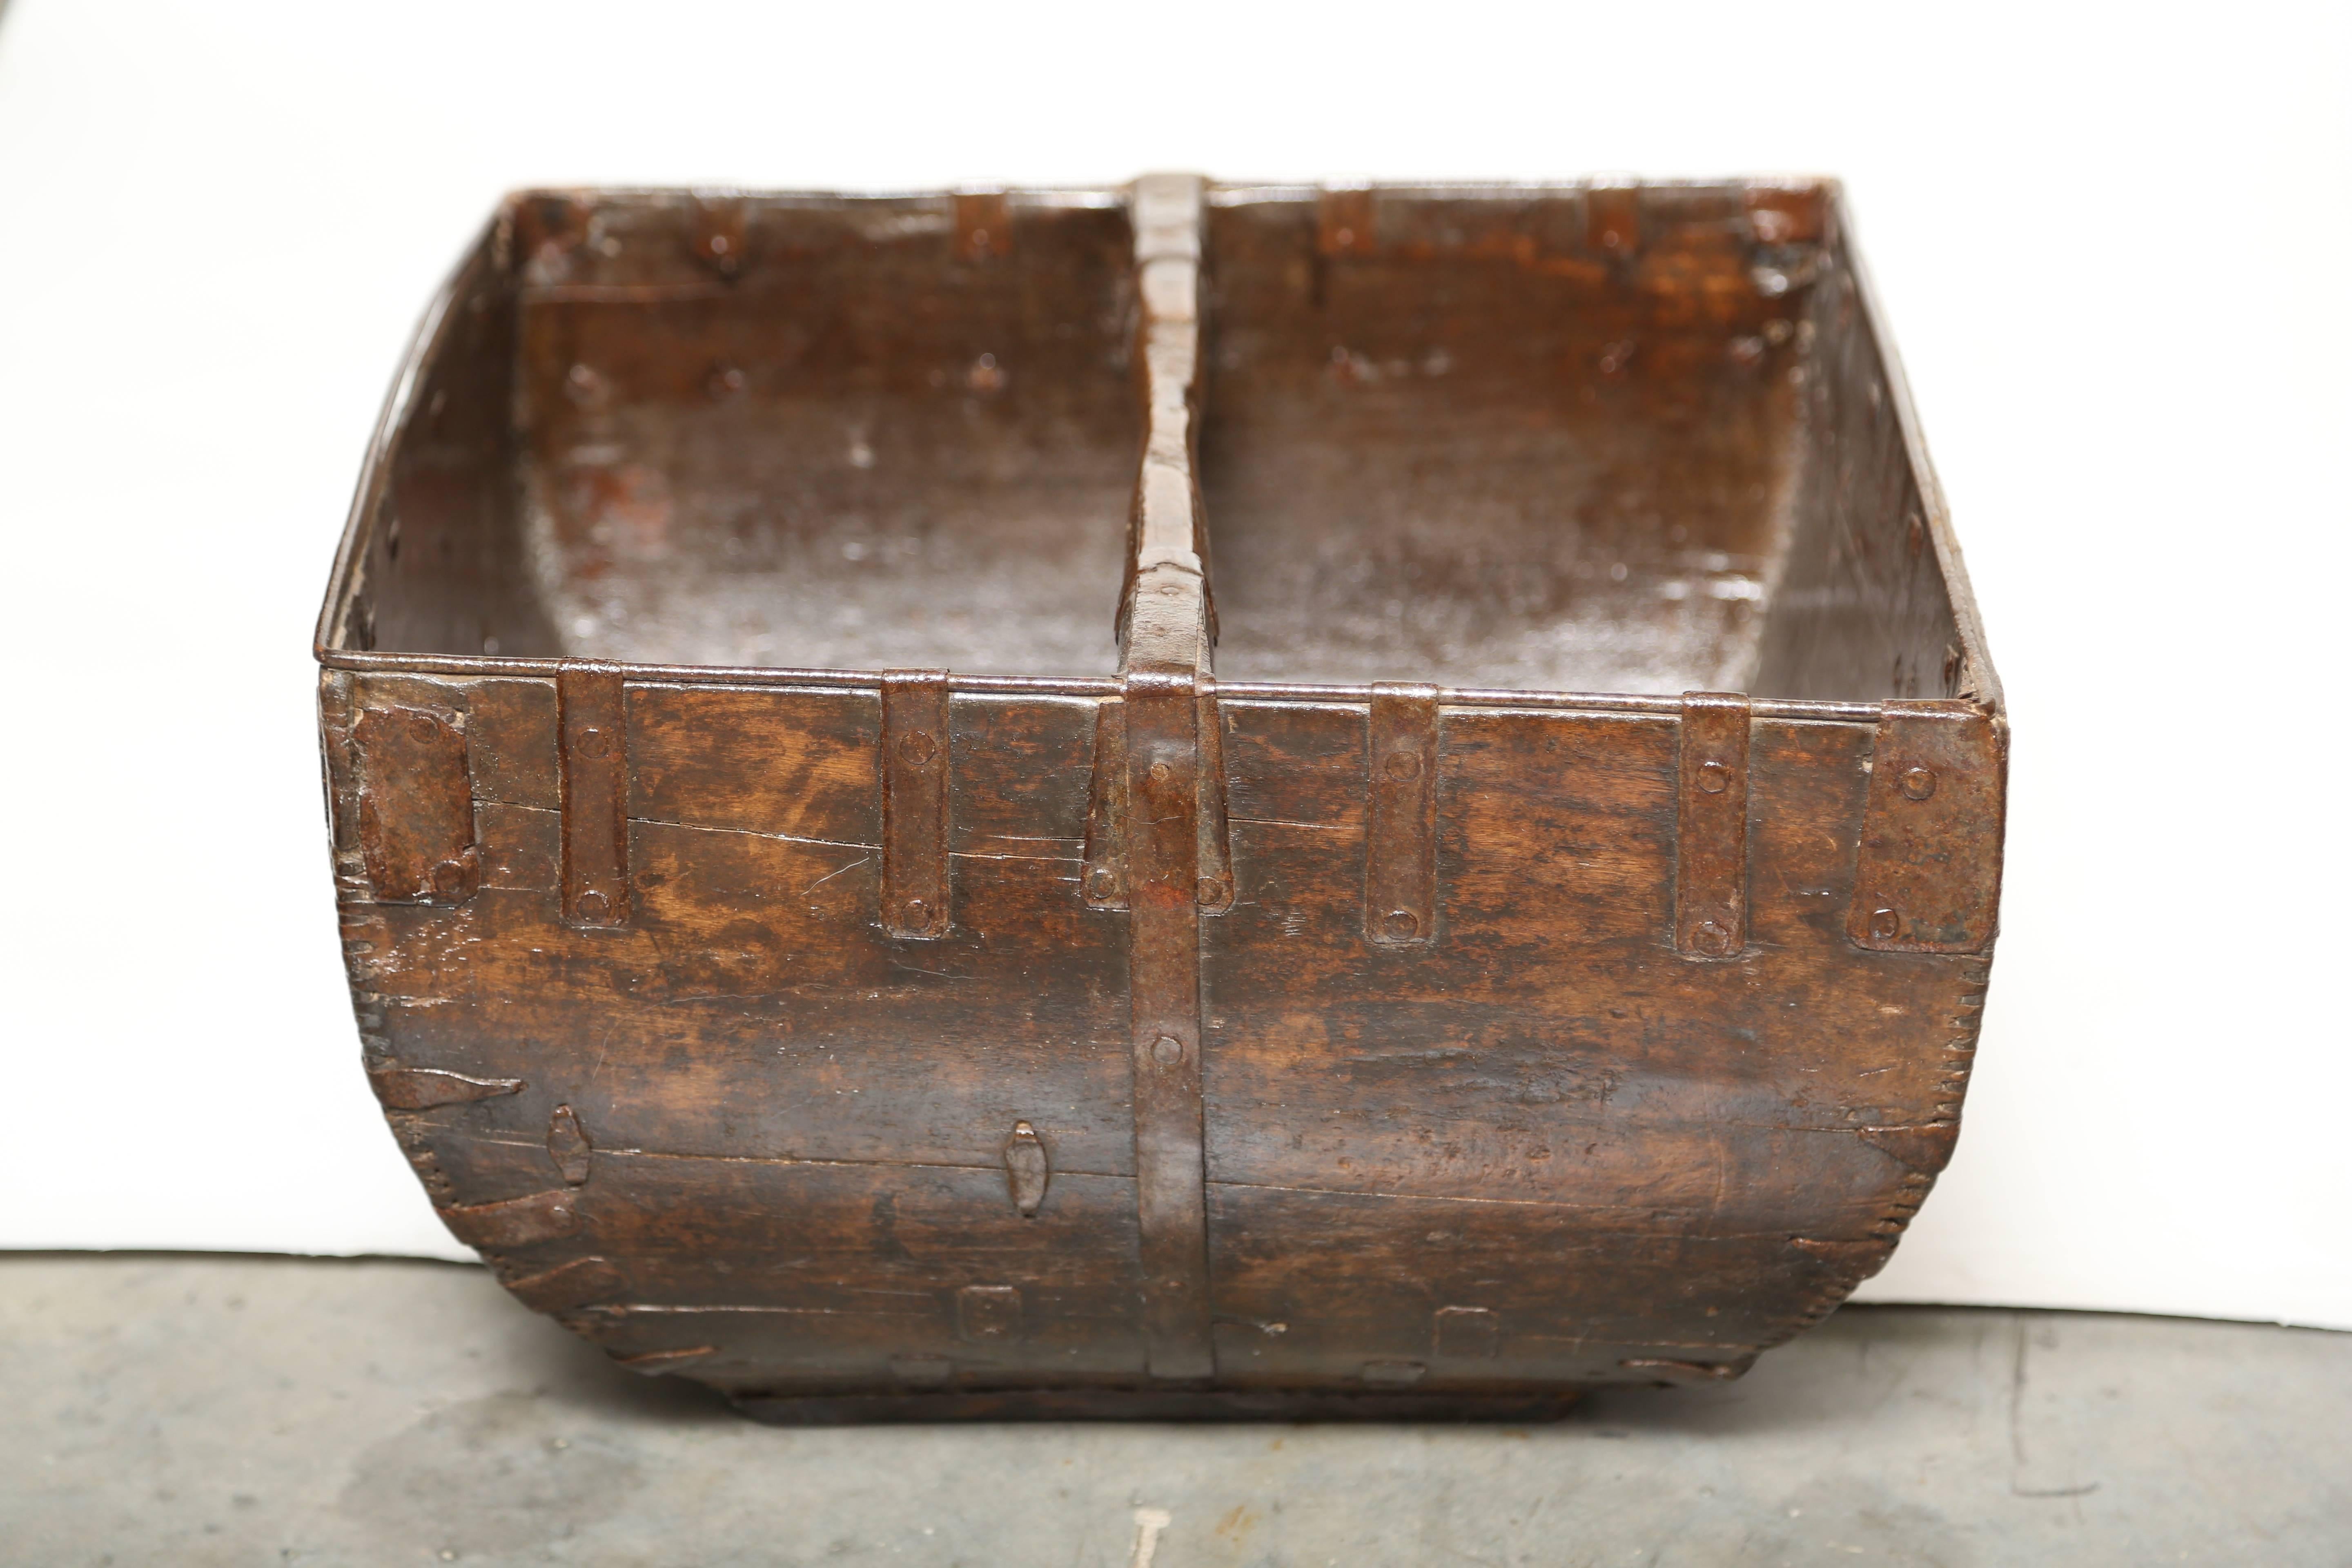 Chinese 19th century rice basket or carrier. Wood construction with metal fasteners creating a wonderful patina. It would make a great magazine holder or to help organize anything at home.